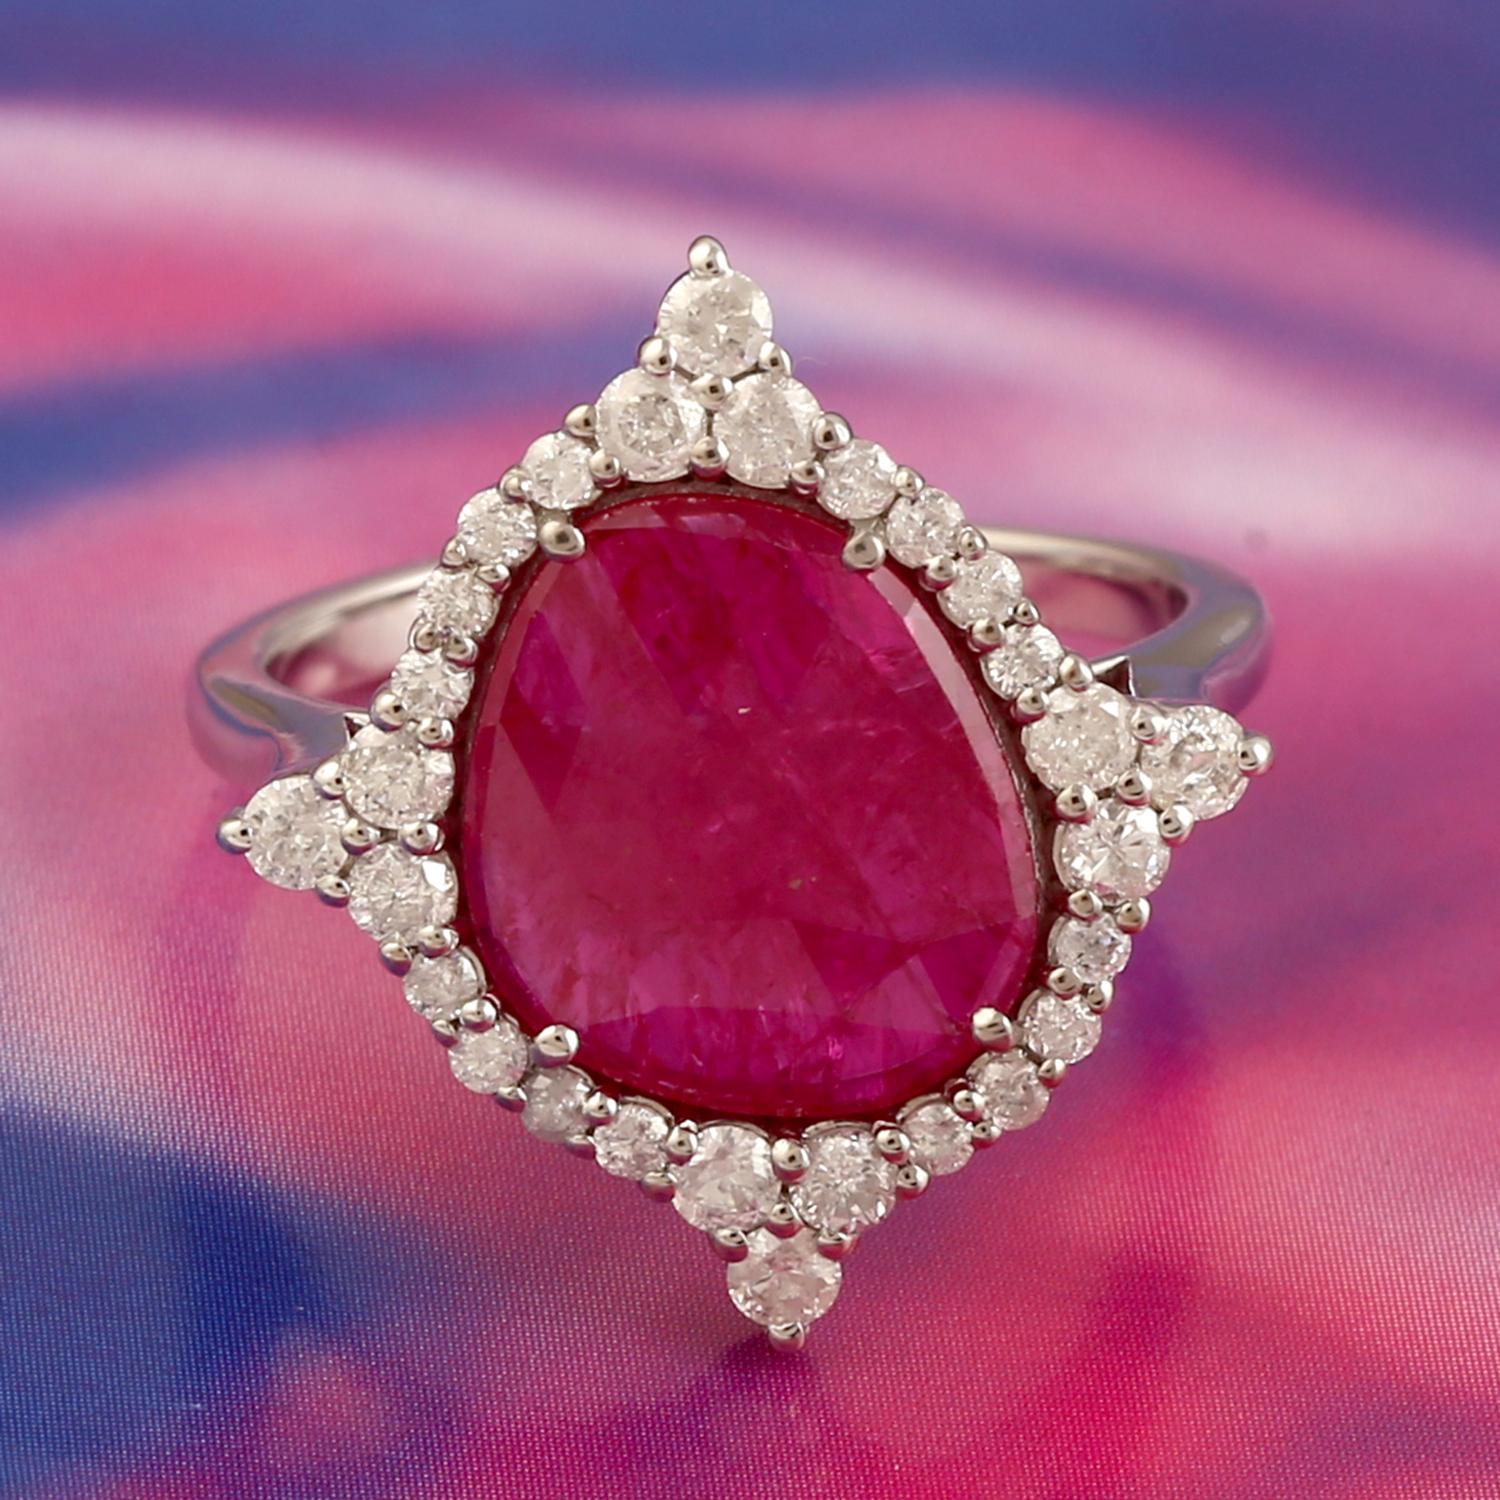 18KT:4.345g,D:0.68ct,
Ruby:3.29ct,
Size: US-7